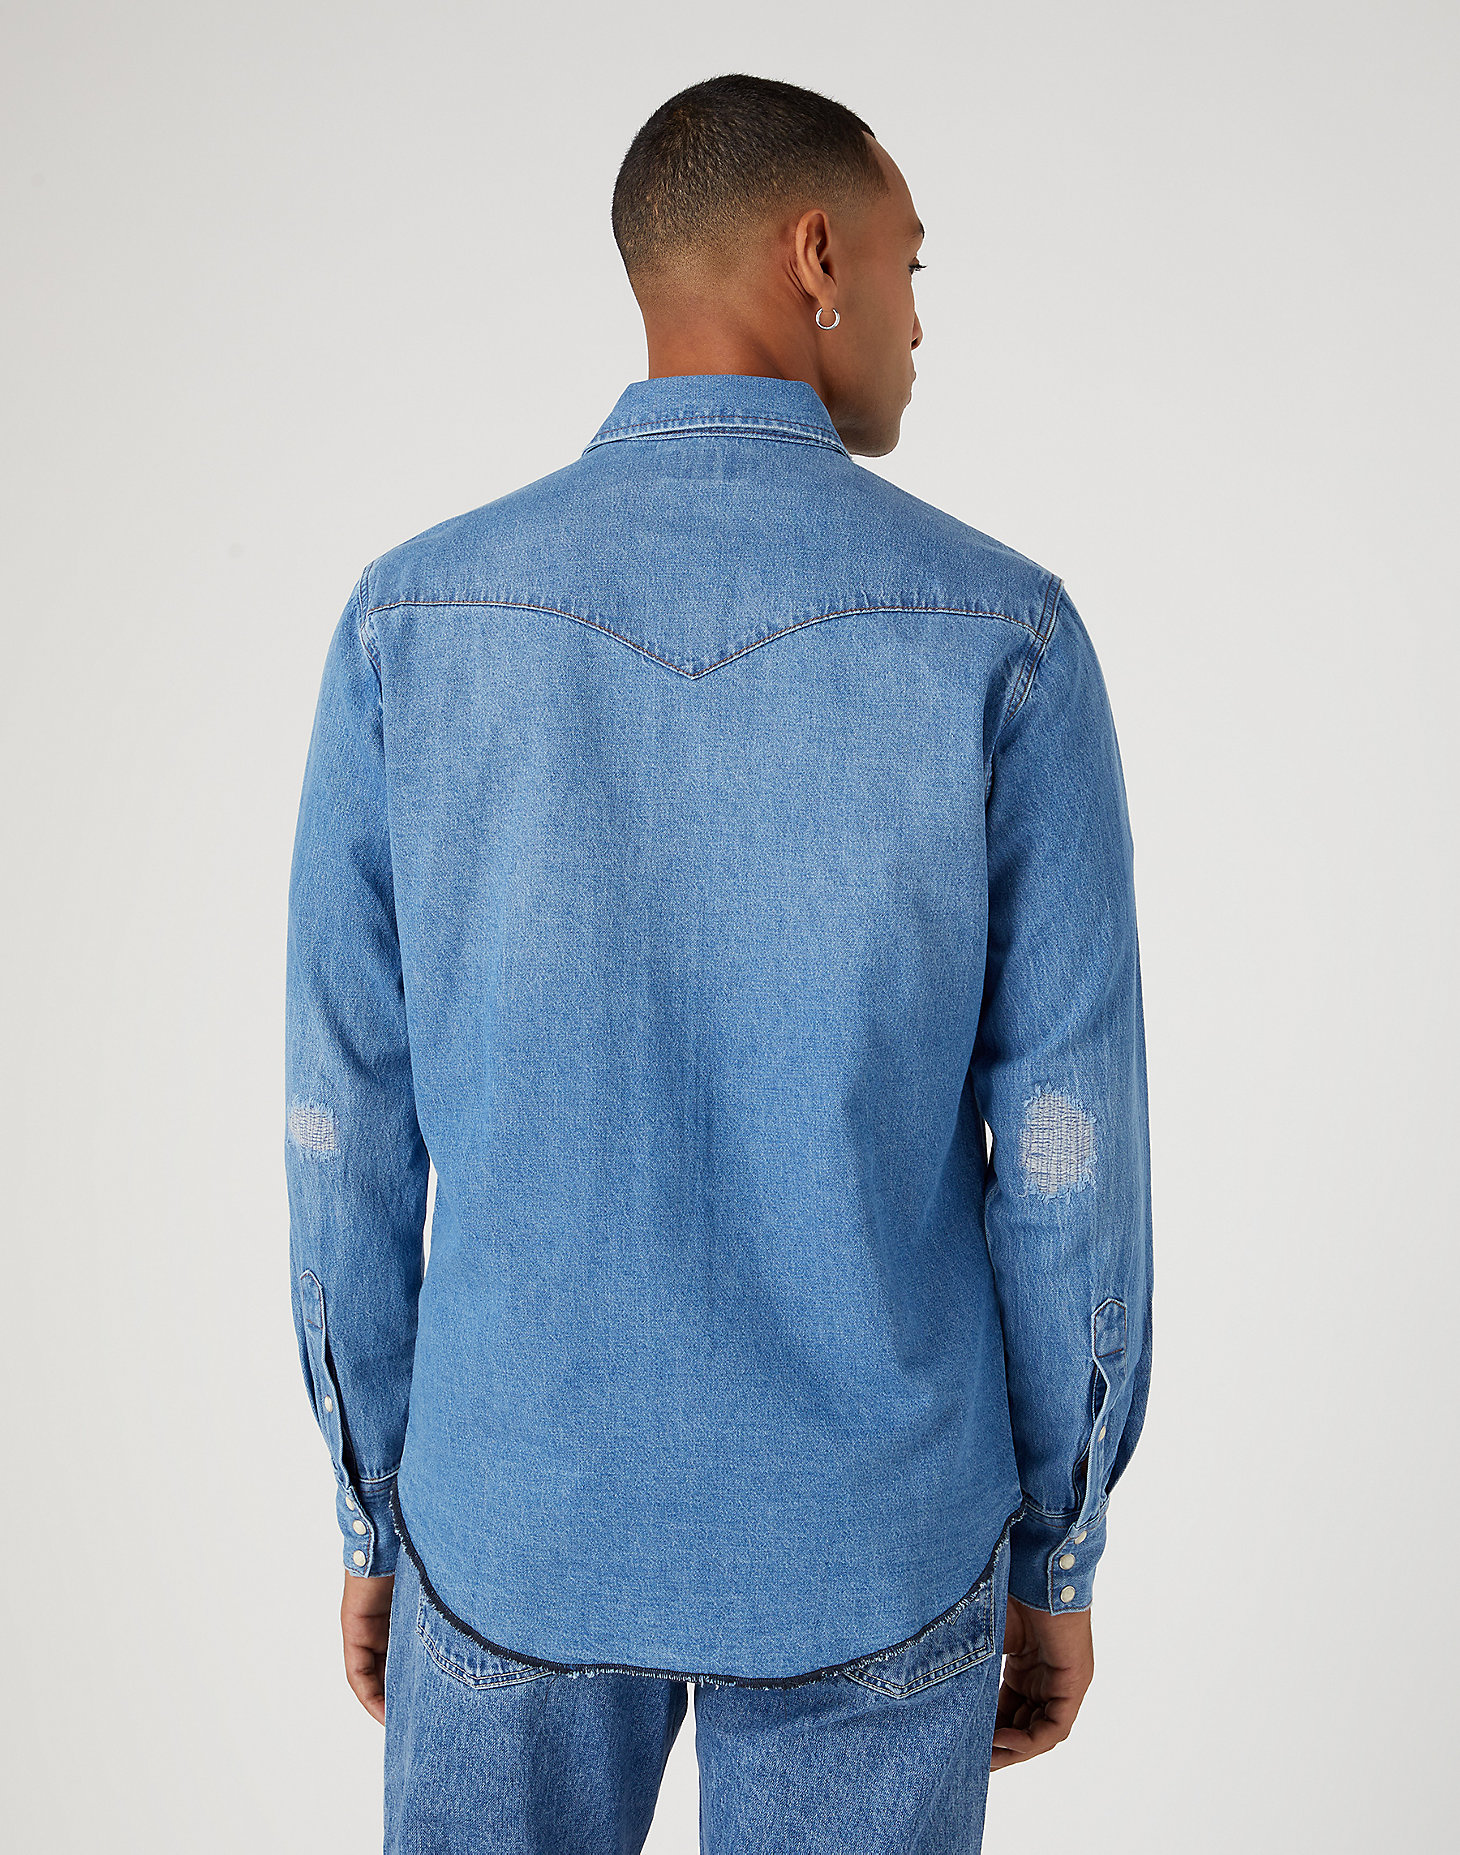 Long Sleeve Workshirt in Authentic Blue alternative view 2